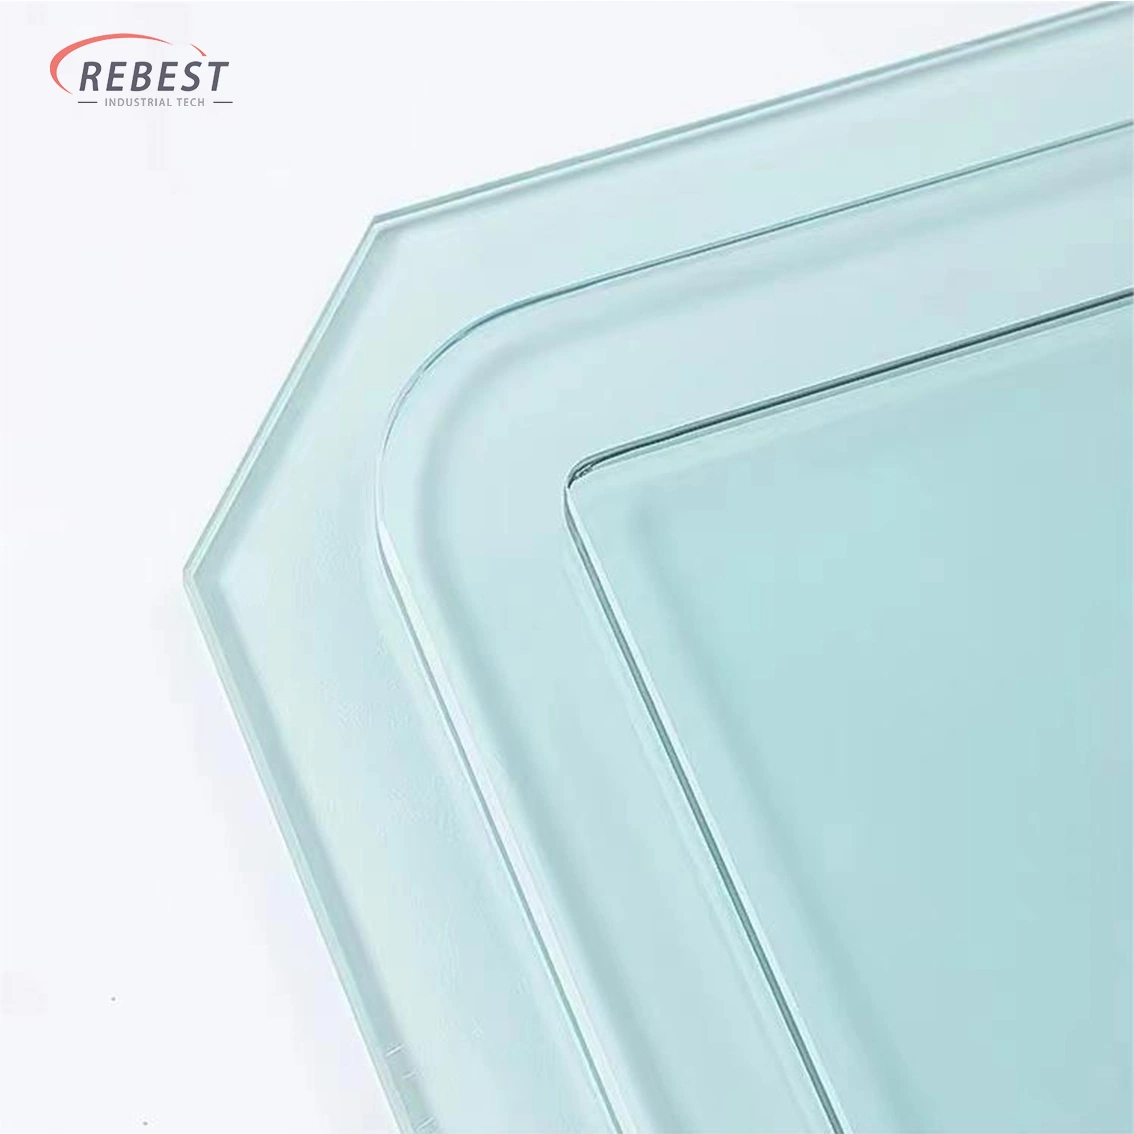 3/4/5/6/8/10/12 mm Tempered Glass/Building Glass/Safety Glass/Laminated Glass/Toughened Glass for Furniture/Door/Window/Decorative/Bathroom